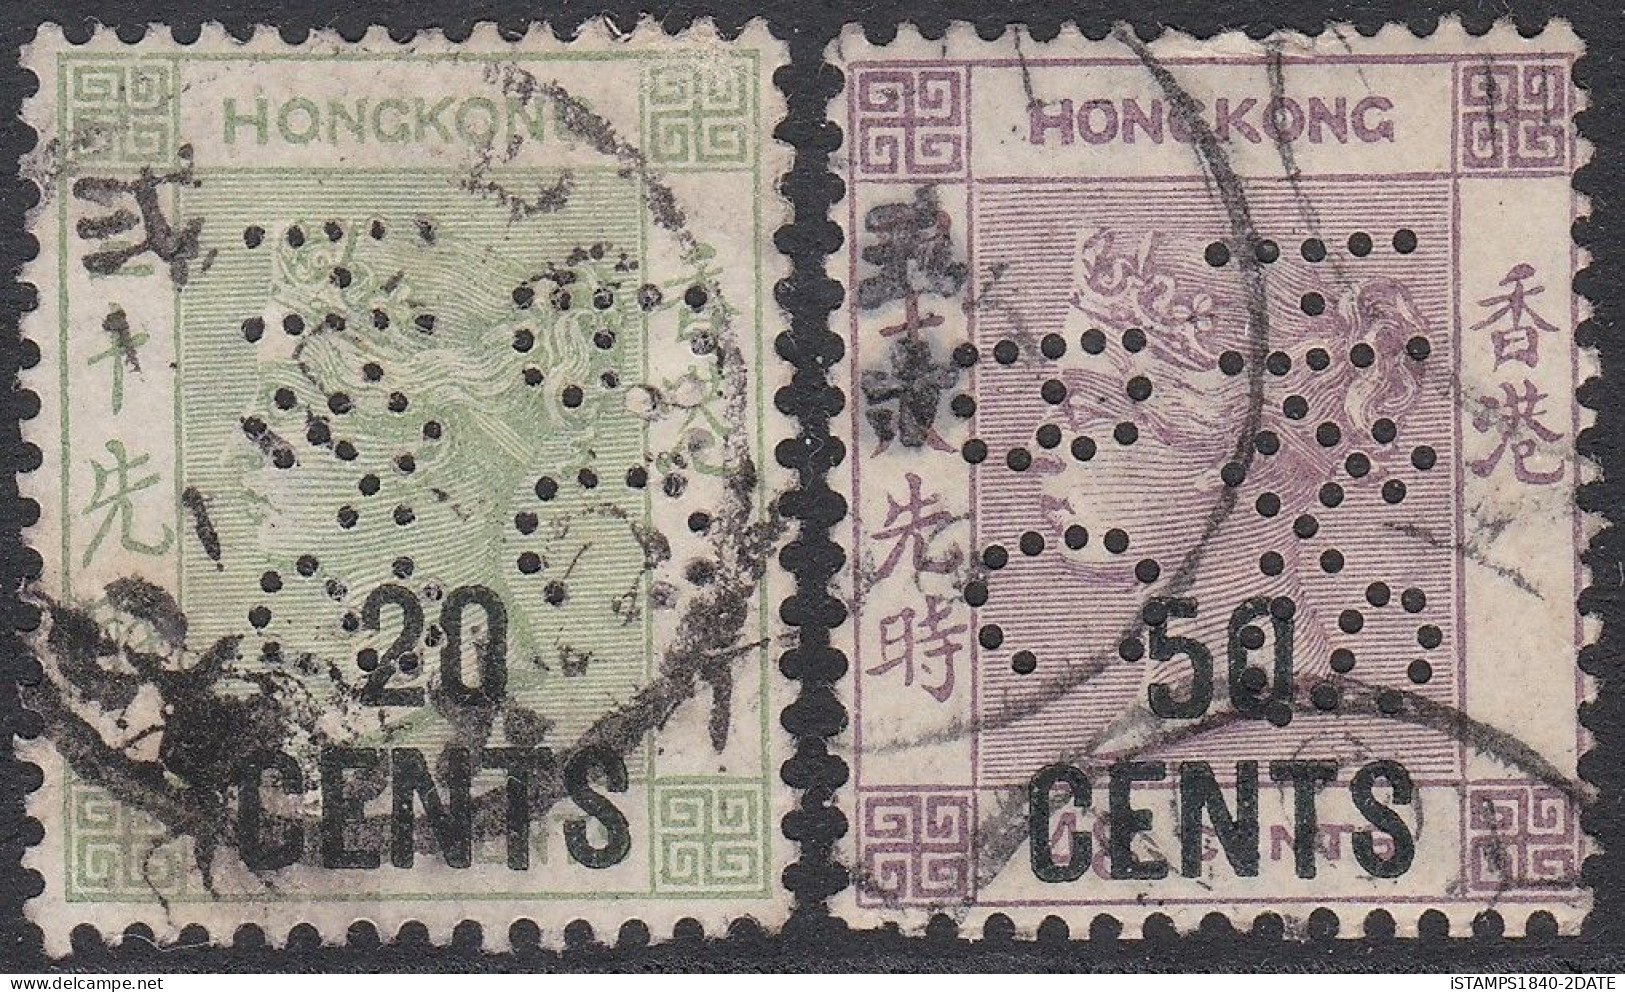 S00162/ Hong Kong 1891 QV SG (48/9) 20c + 50c Overprints Used Cds Perfin H & S BC Cv £20 - Used Stamps